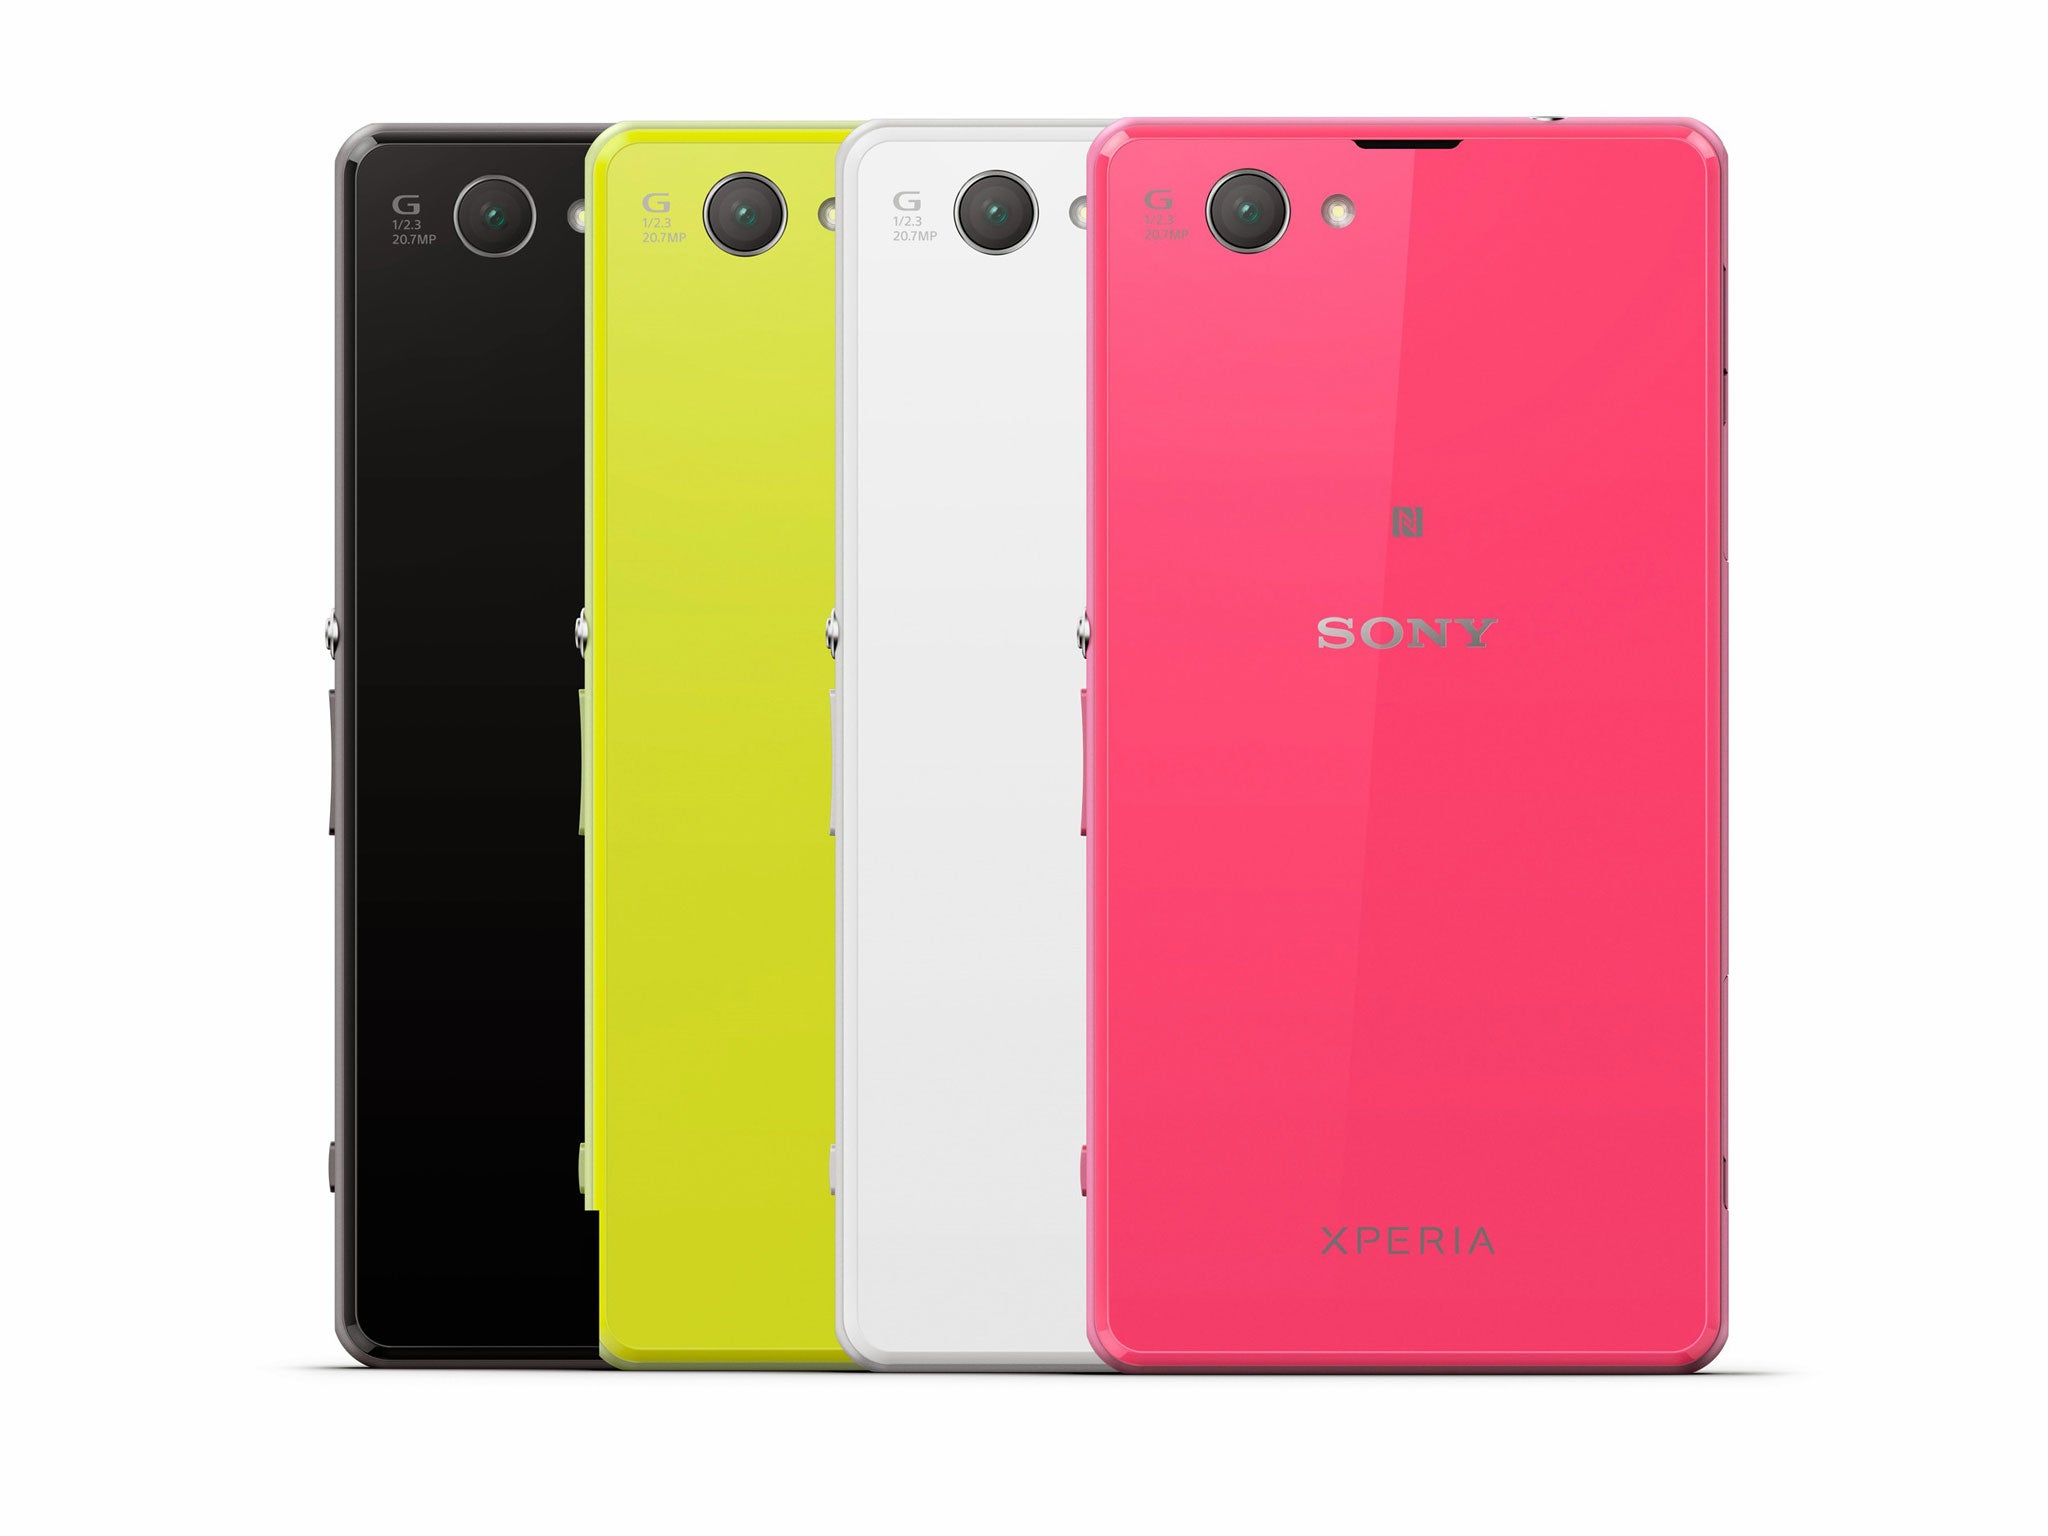 Sony's Xperia Z1 Compact takes strong design and makes it smaller